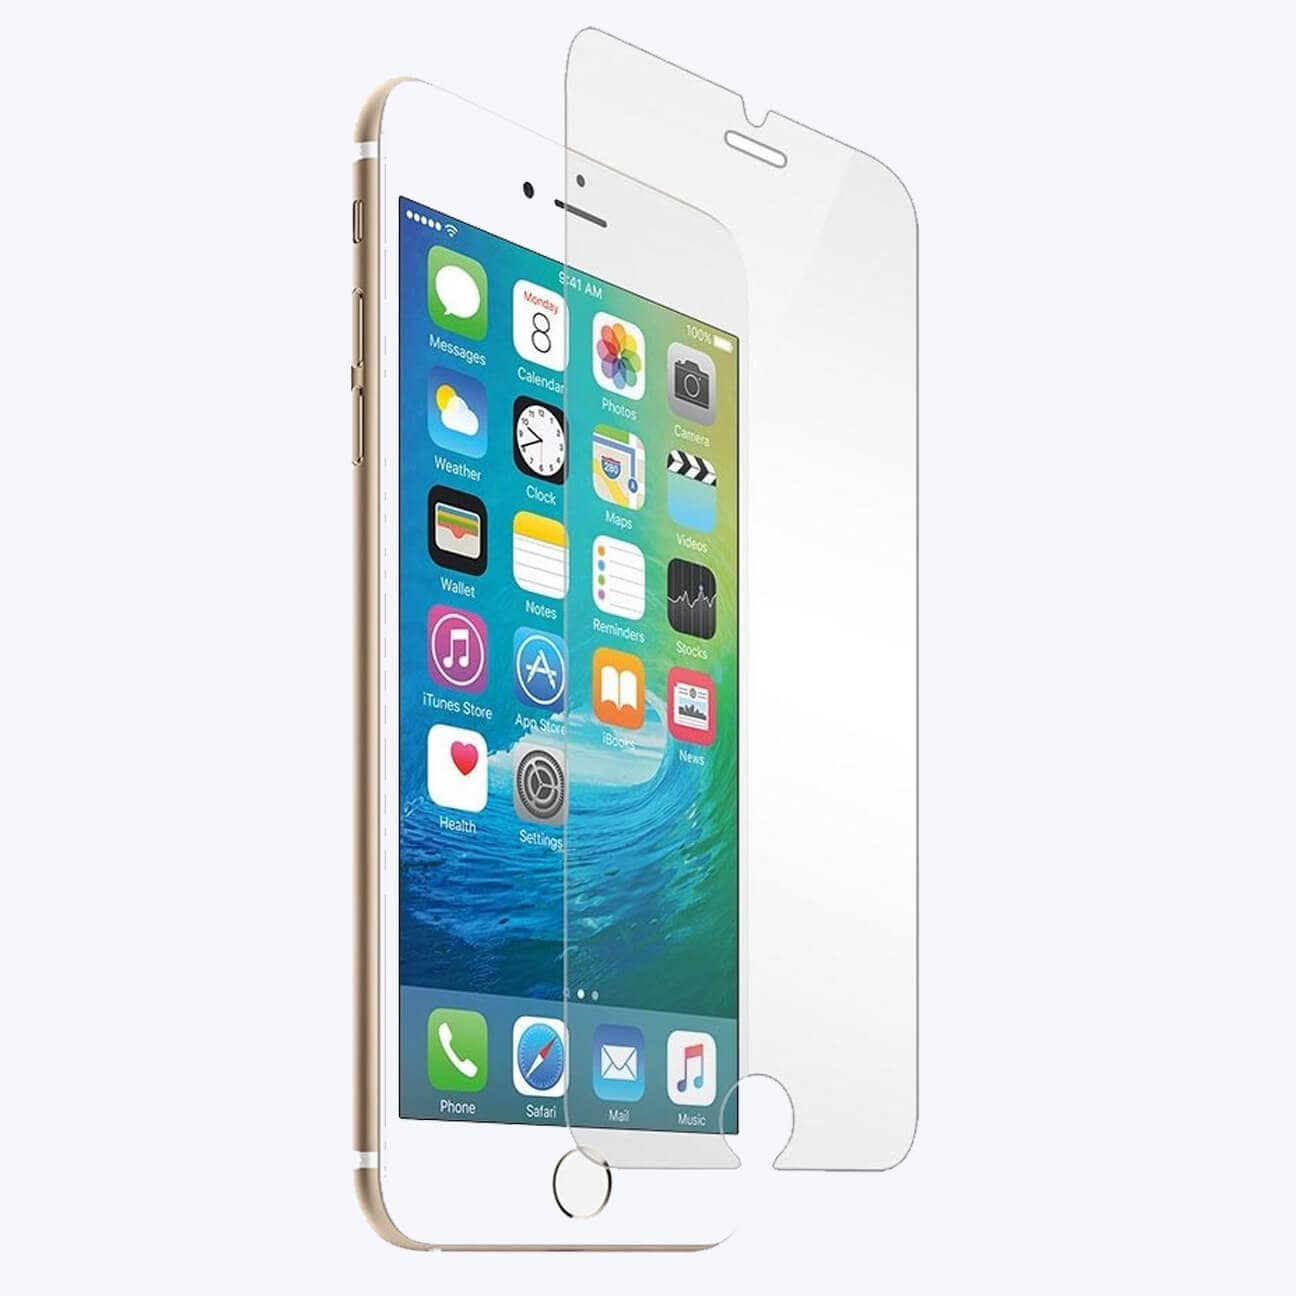 Apple iPhone 5c Tempered Glass Screen Protector